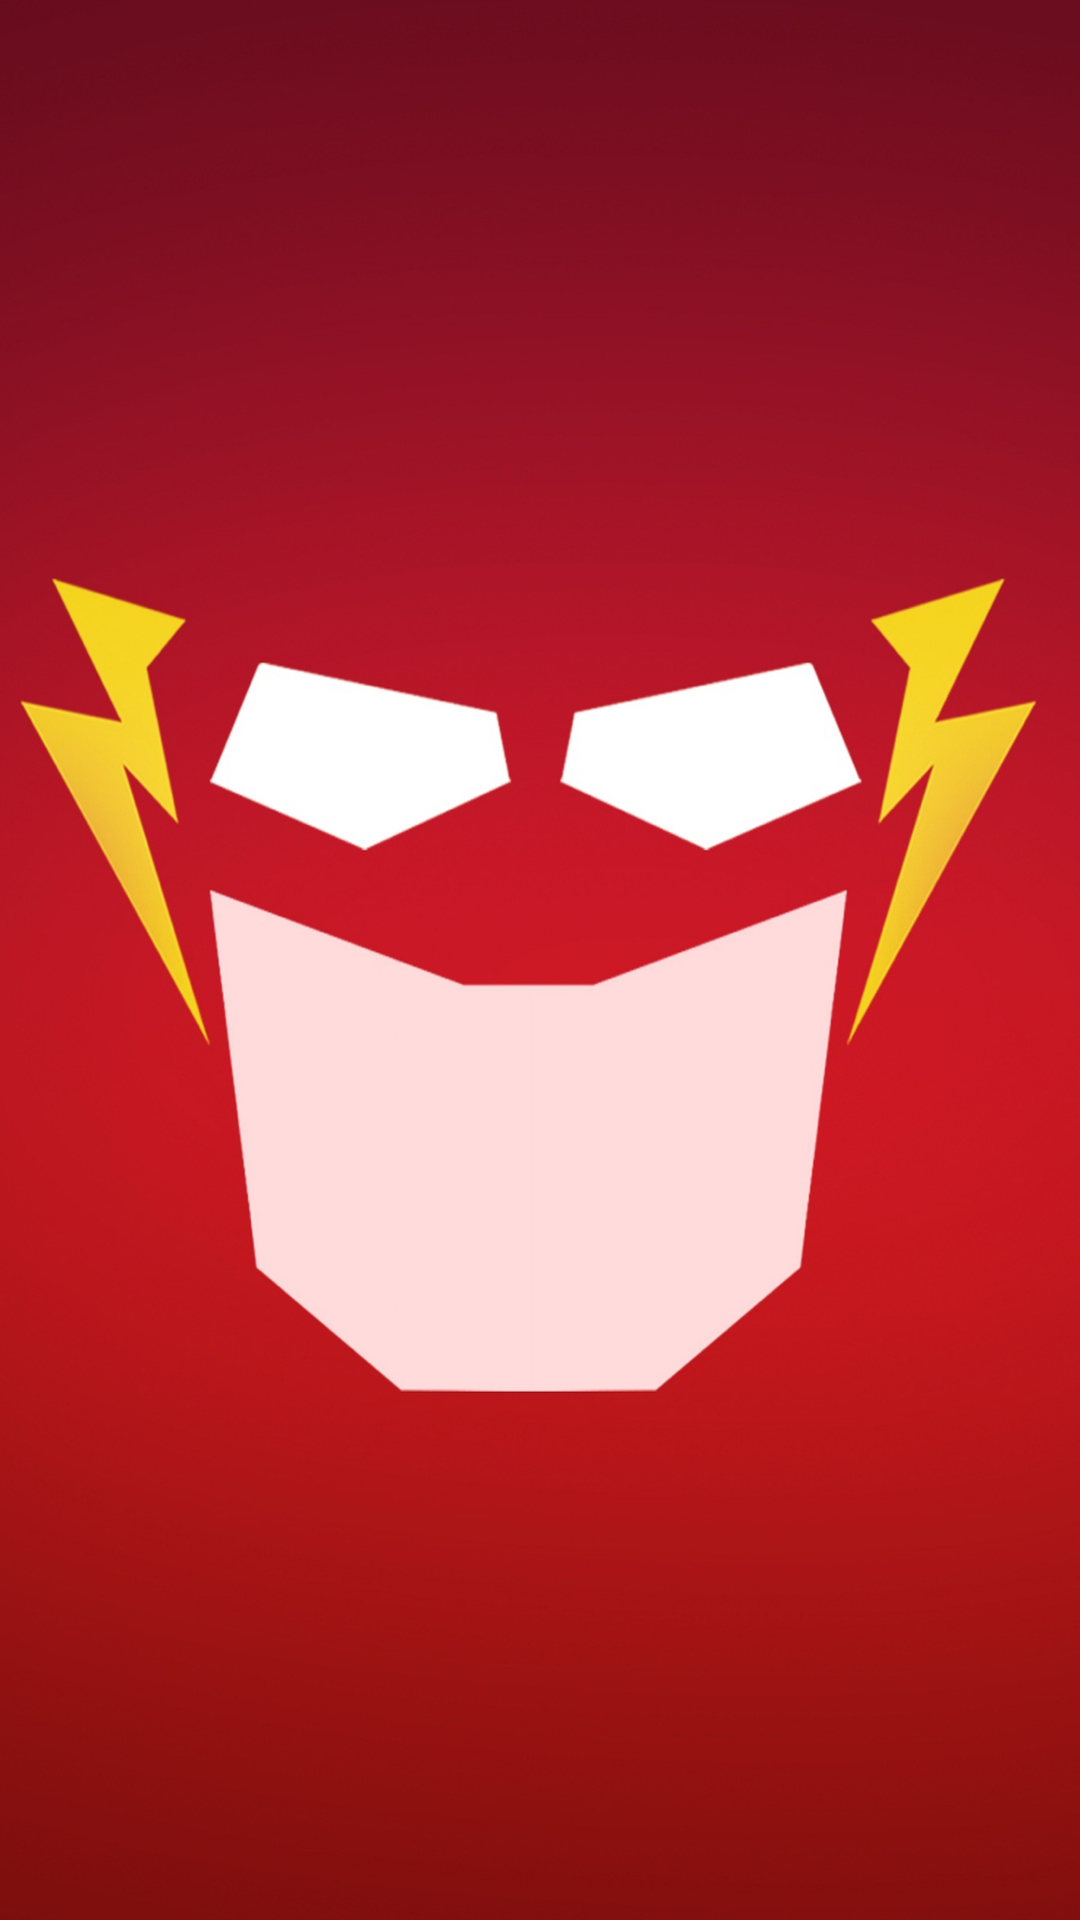 The Flash Returns - Muzeon Park Of Arts , HD Wallpaper & Backgrounds